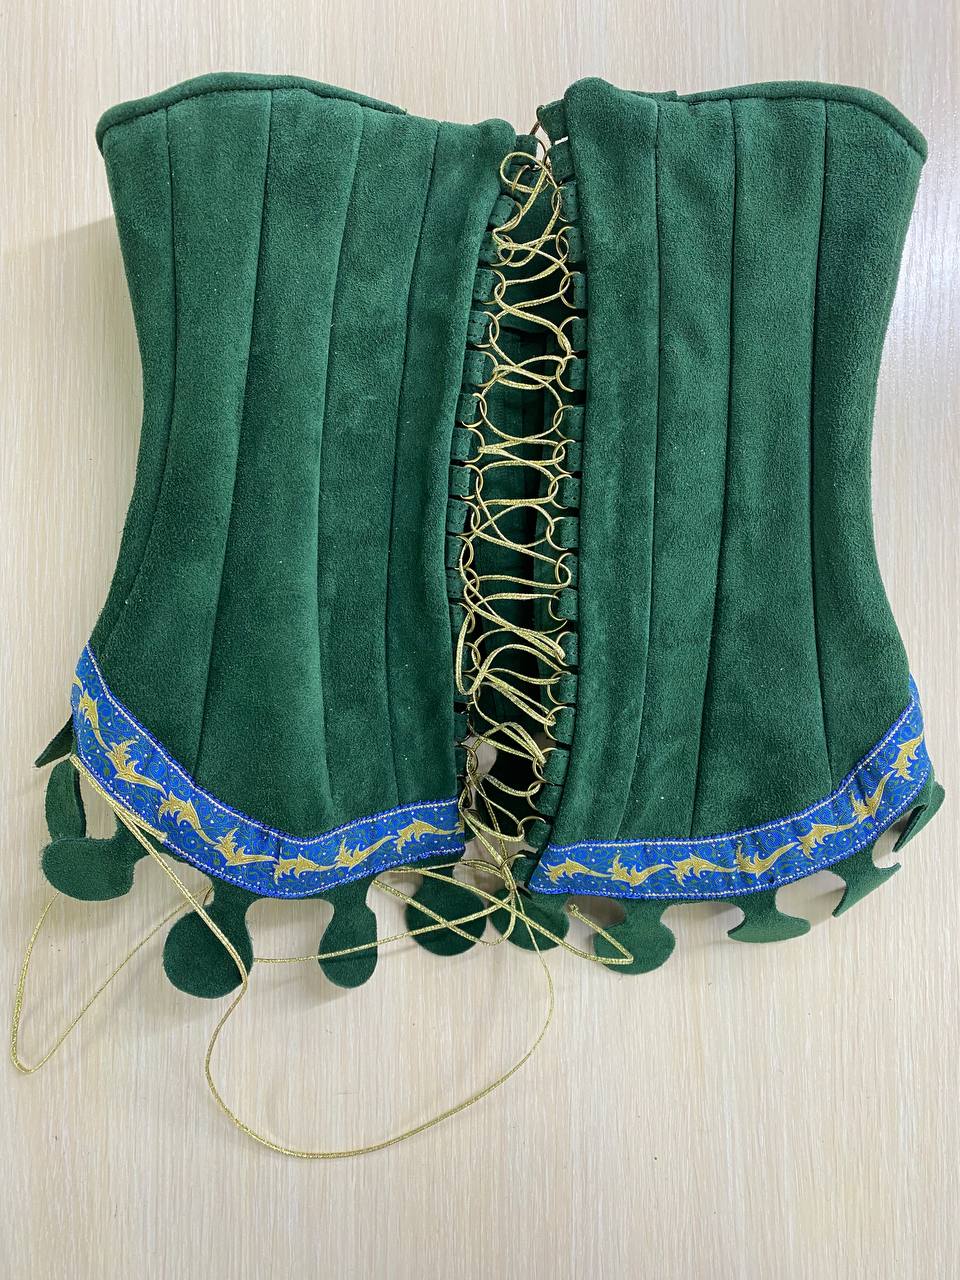 Common - sale-medieval-style-suede-corset-belt-lady-of-the-lake-grass-colored-natural-suede.jpg